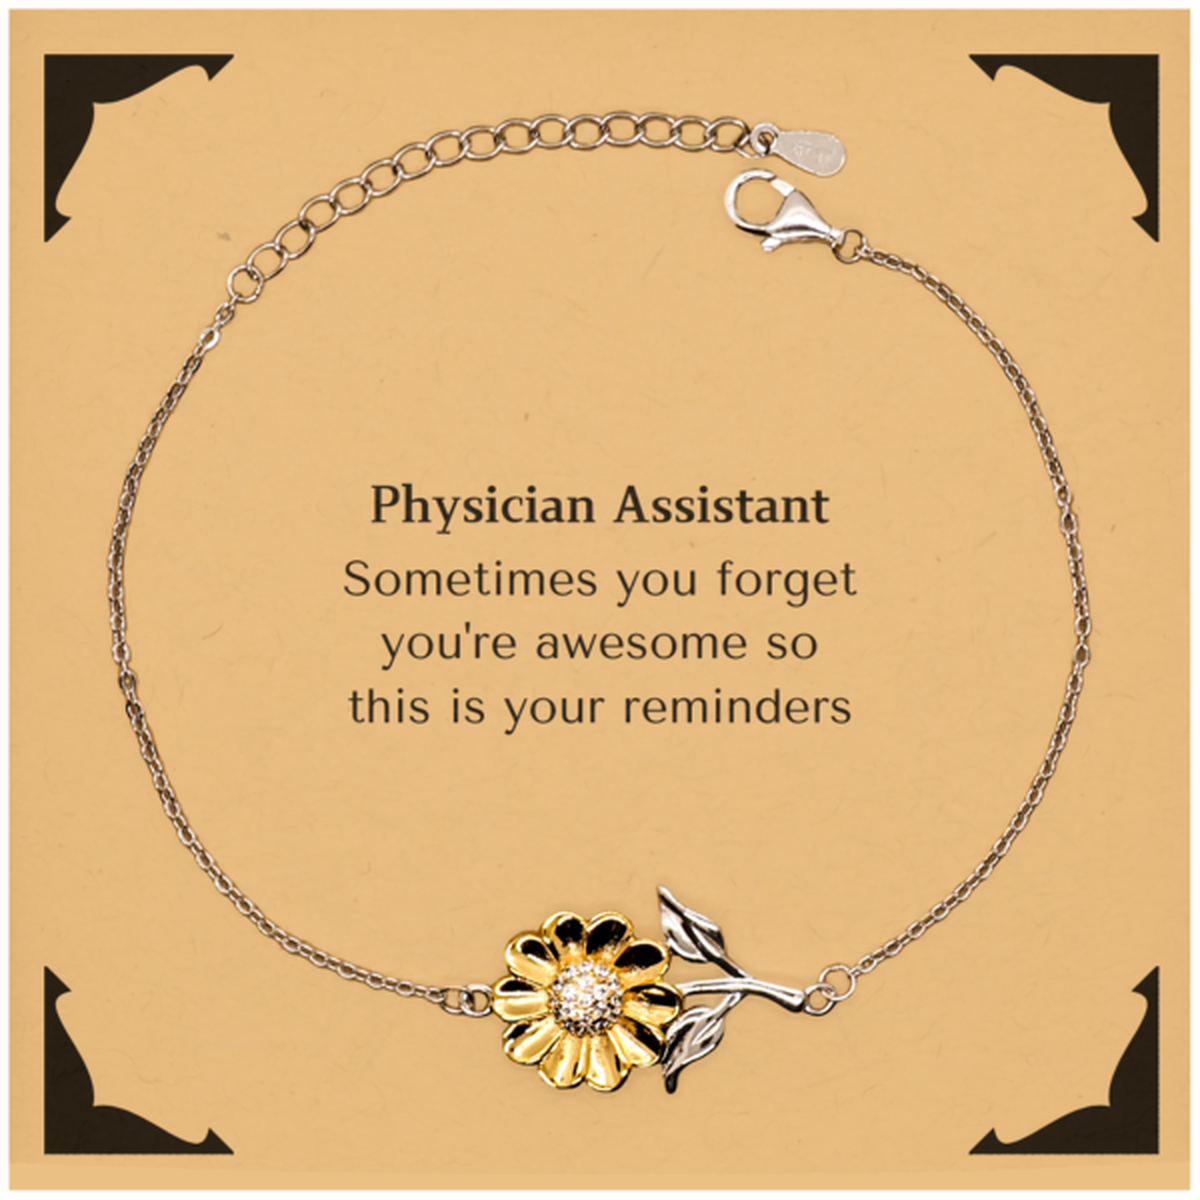 Sentimental Physician Assistant Sunflower Bracelet, Physician Assistant Sometimes you forget you're awesome so this is your reminders, Graduation Christmas Birthday Gifts for Physician Assistant, Men, Women, Coworkers